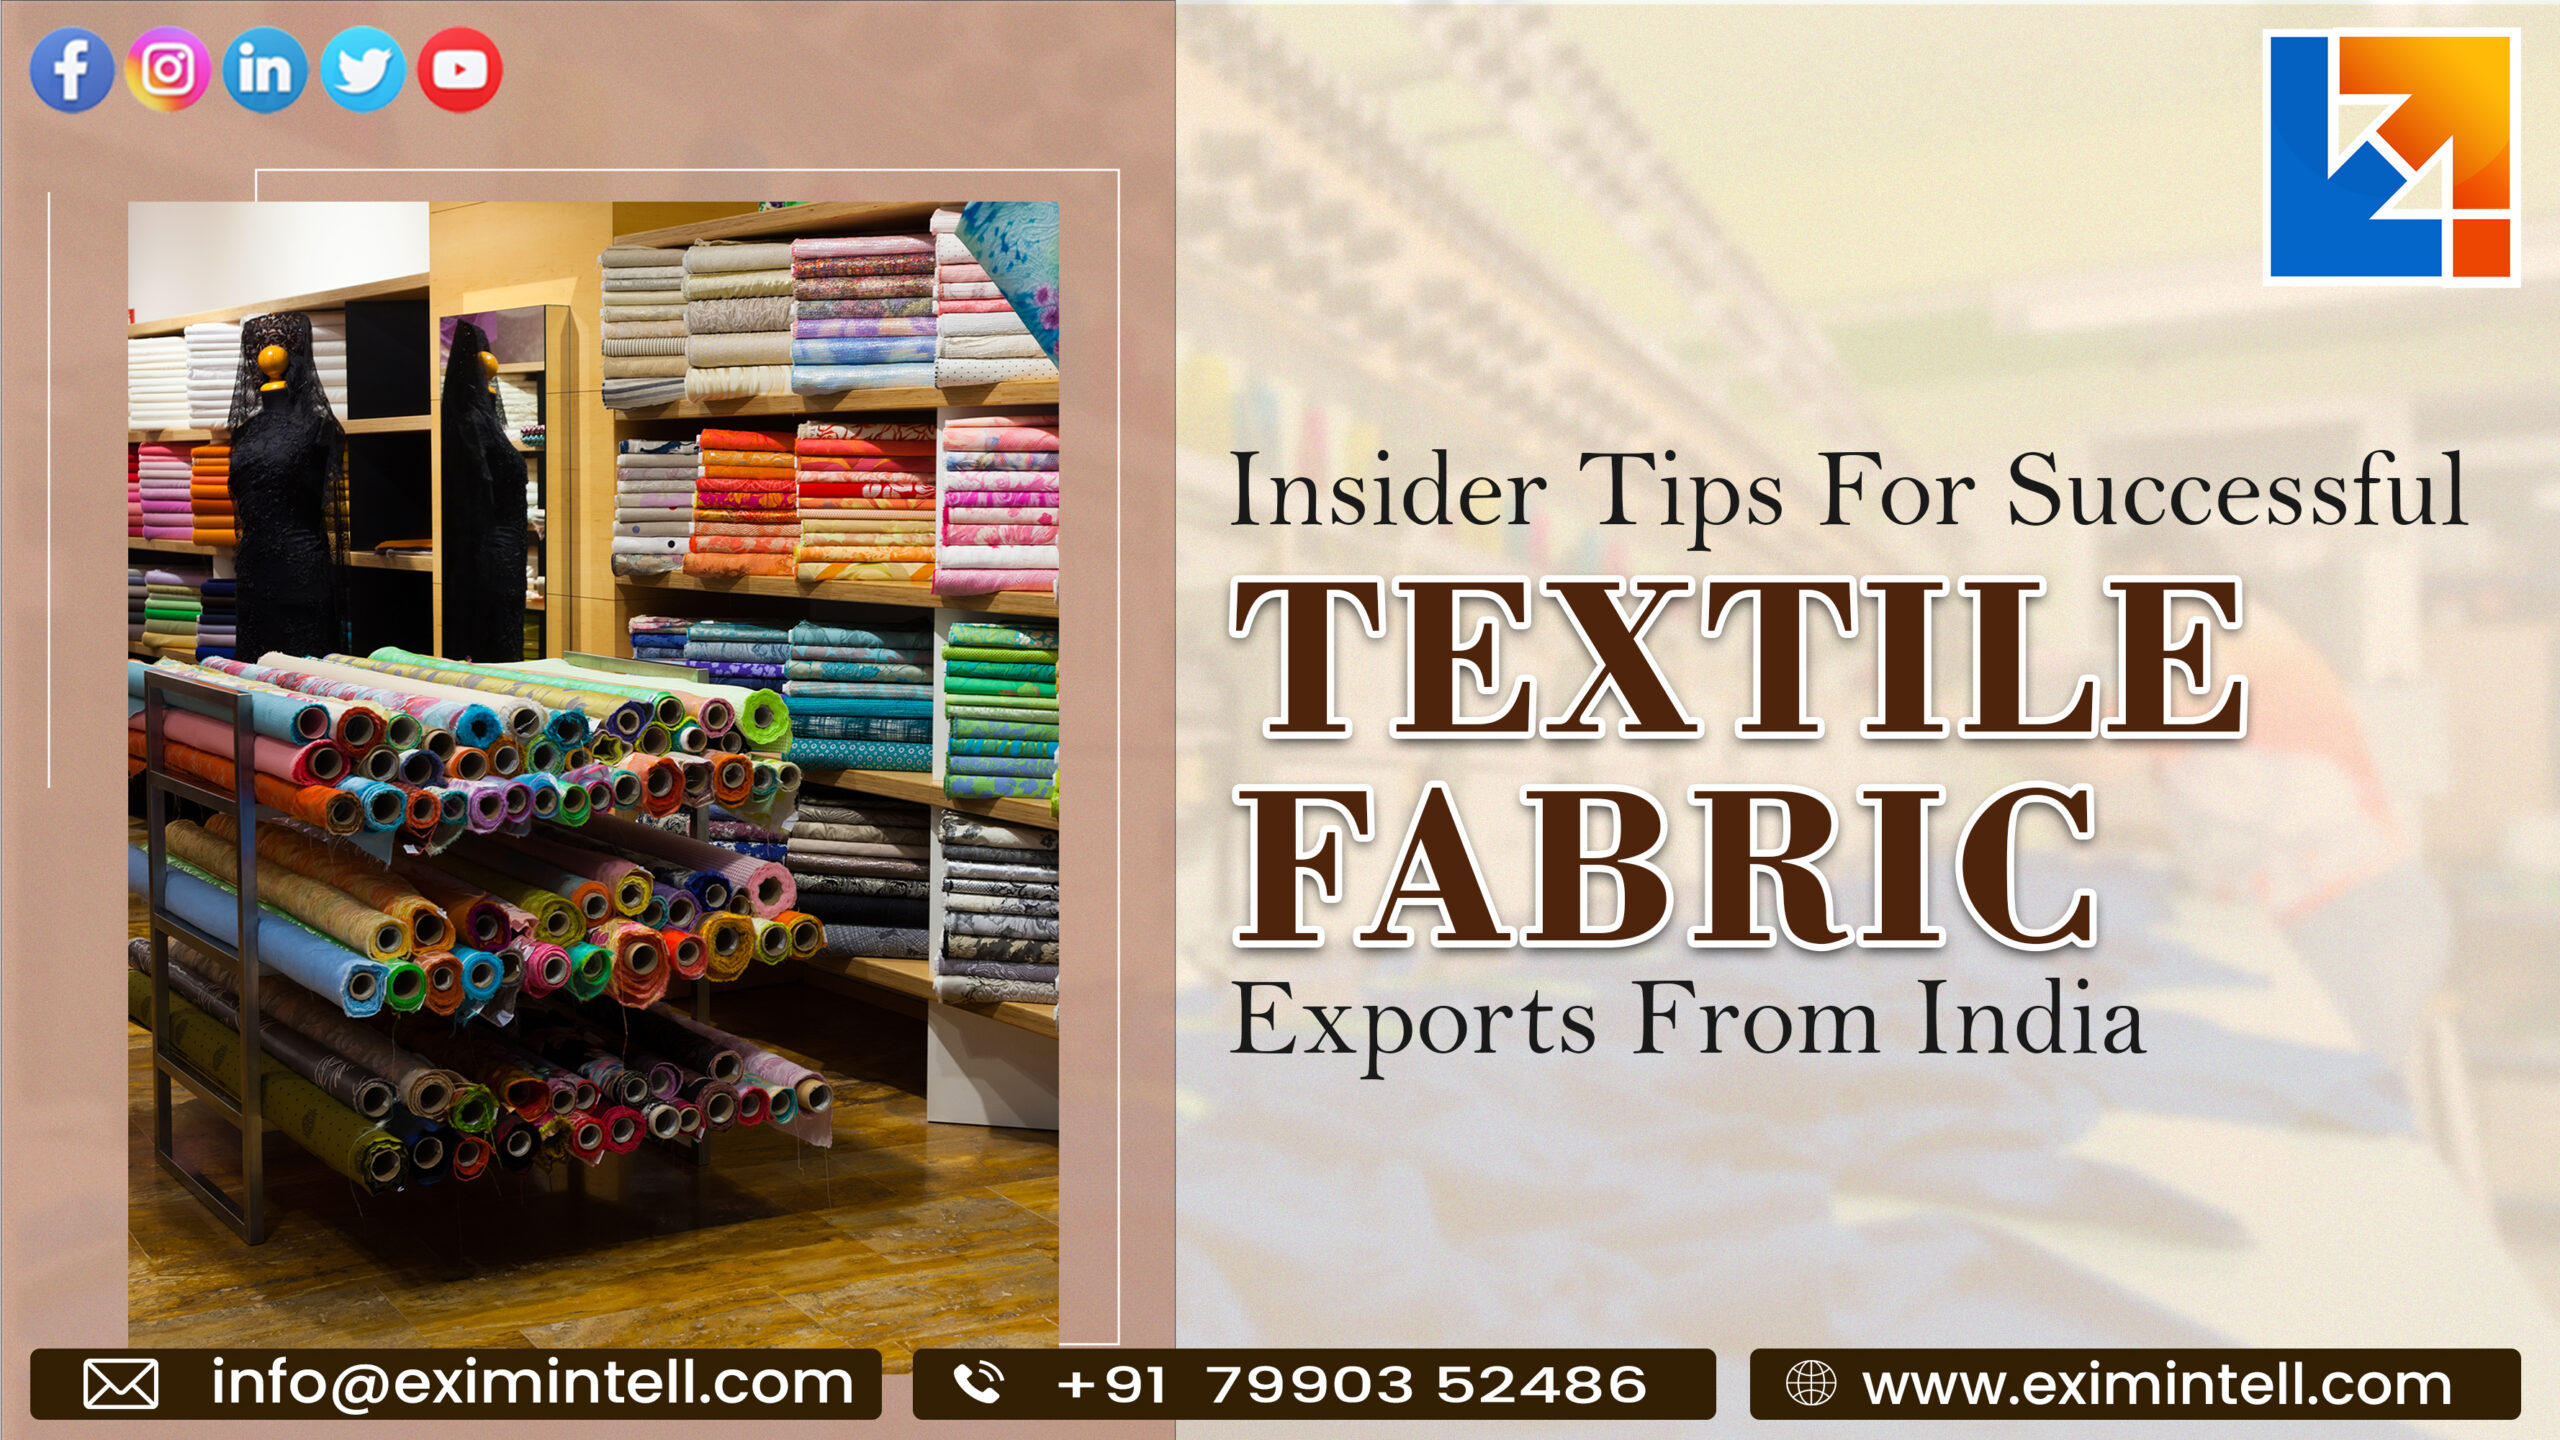 Insider Tips for Successful Textile Fabric Exports from India